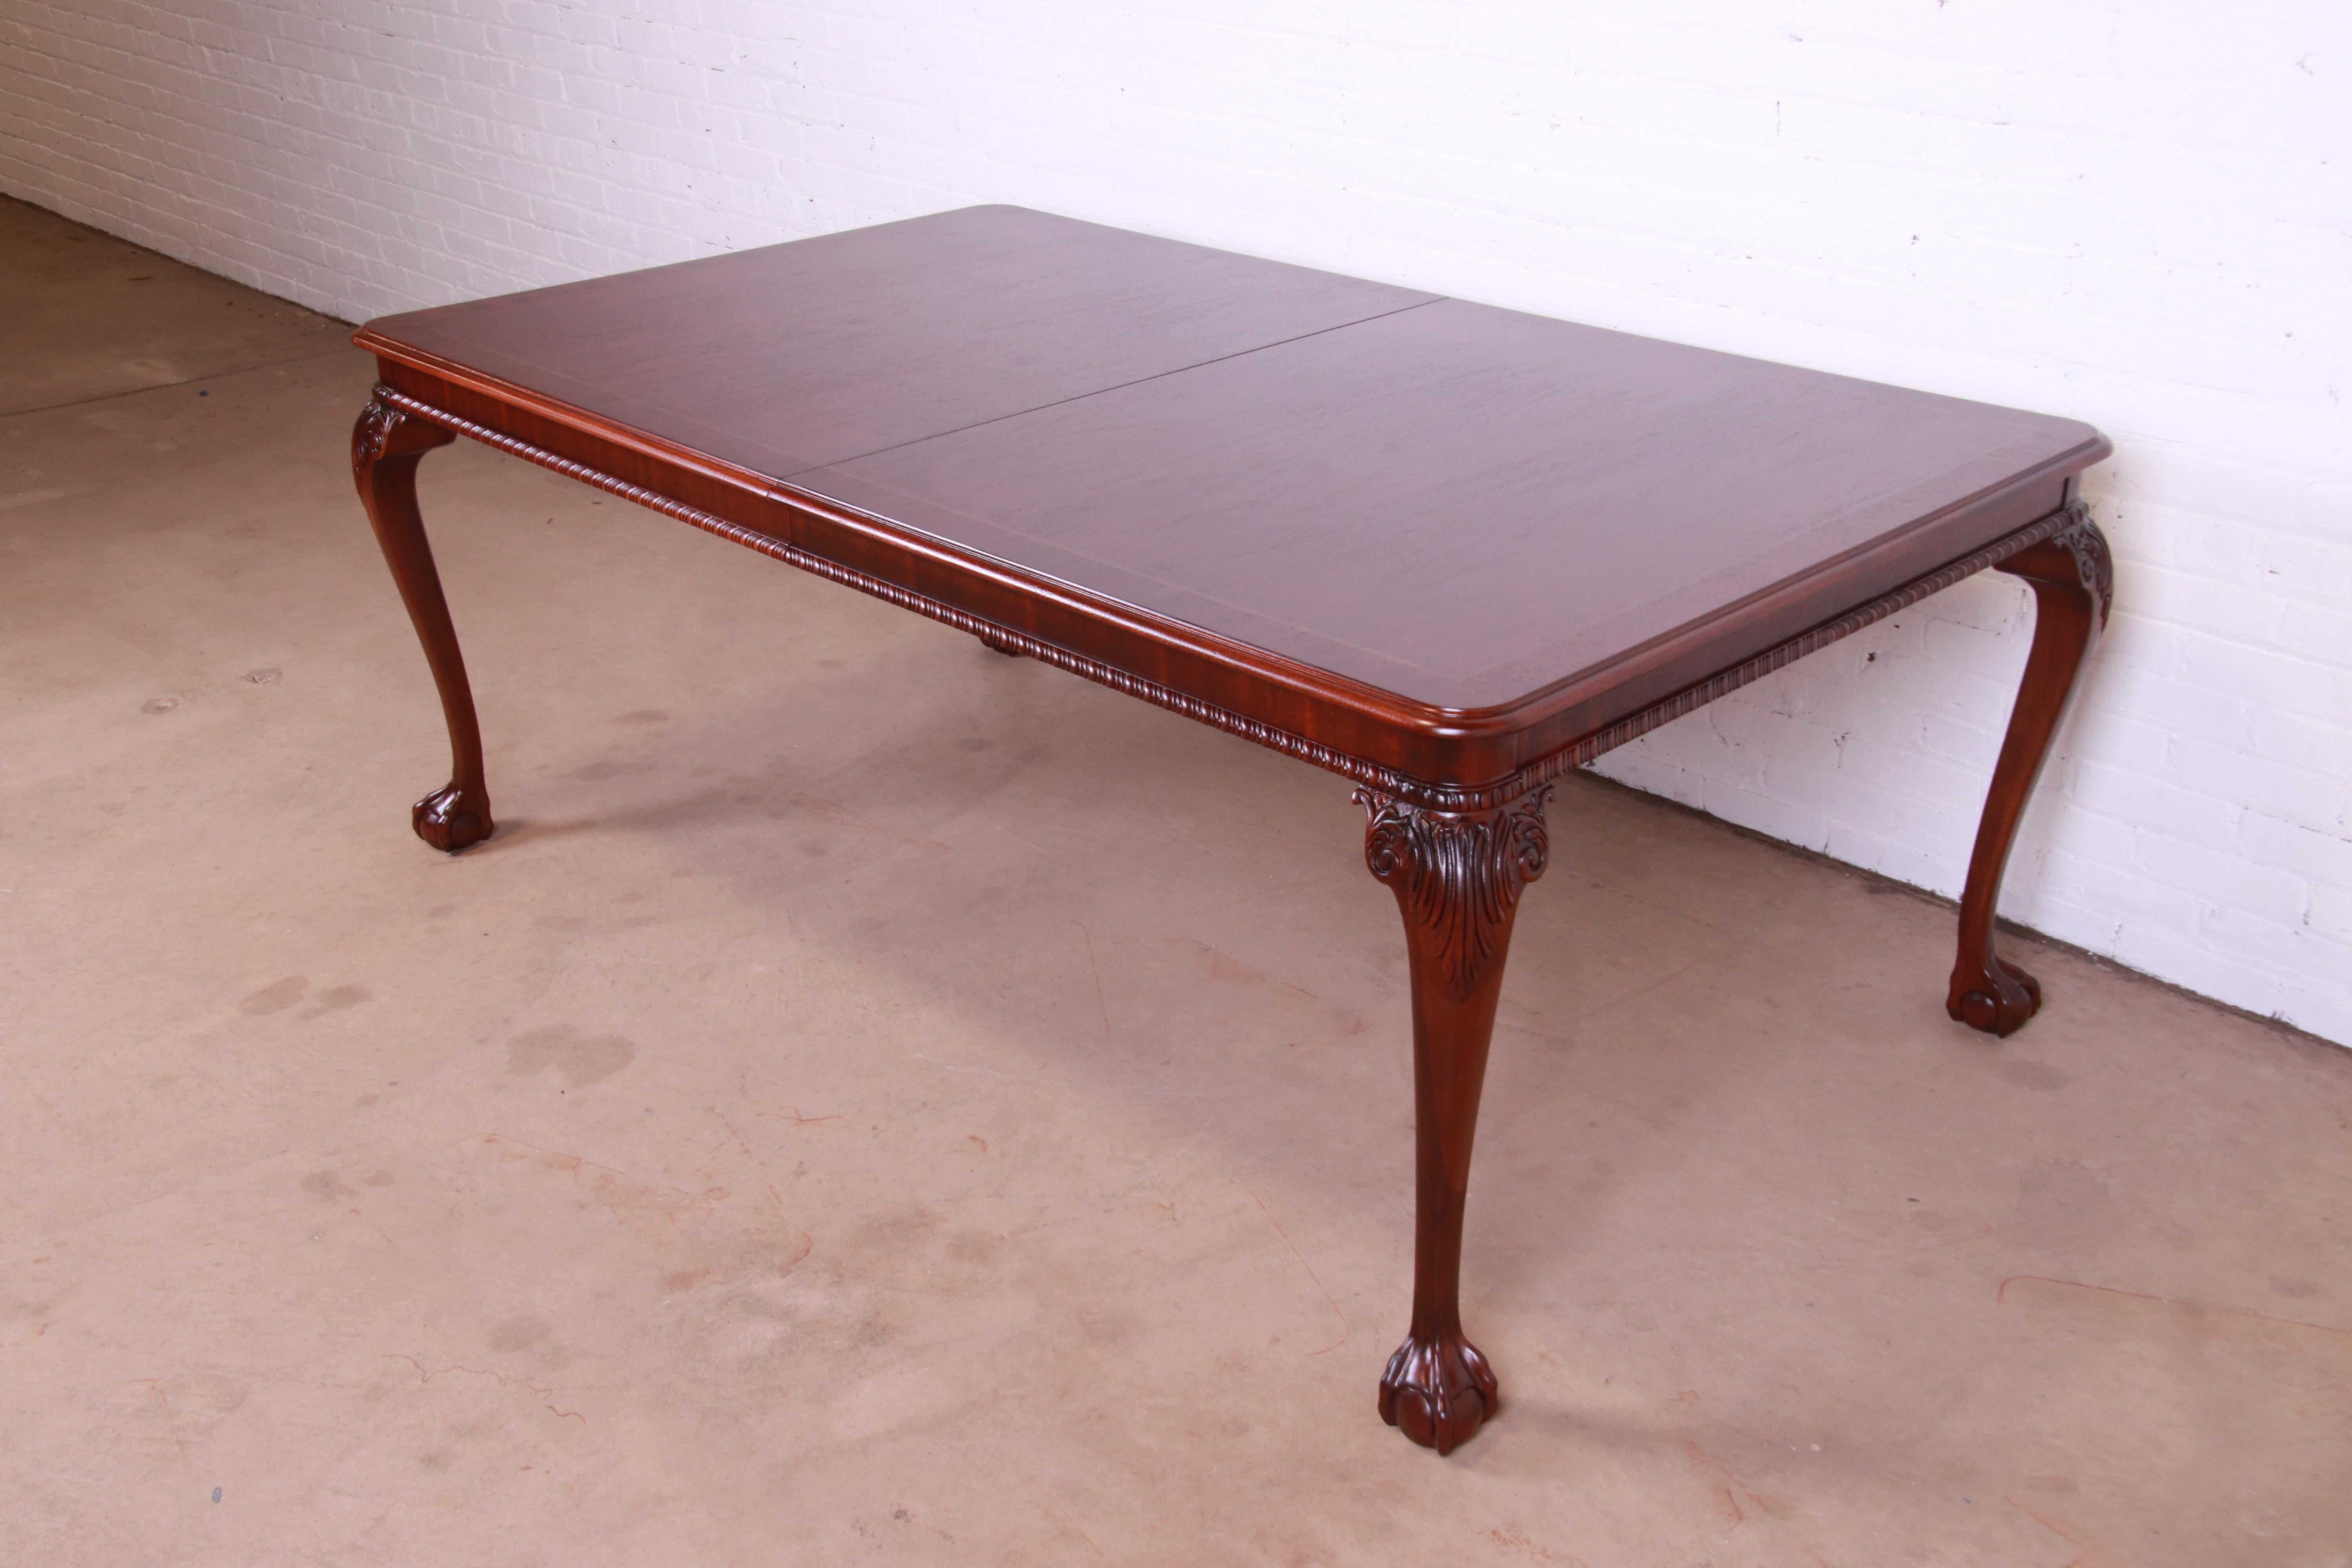 Councill Furniture Chippendale Carved Mahogany Dining Table, Newly Refinished For Sale 5